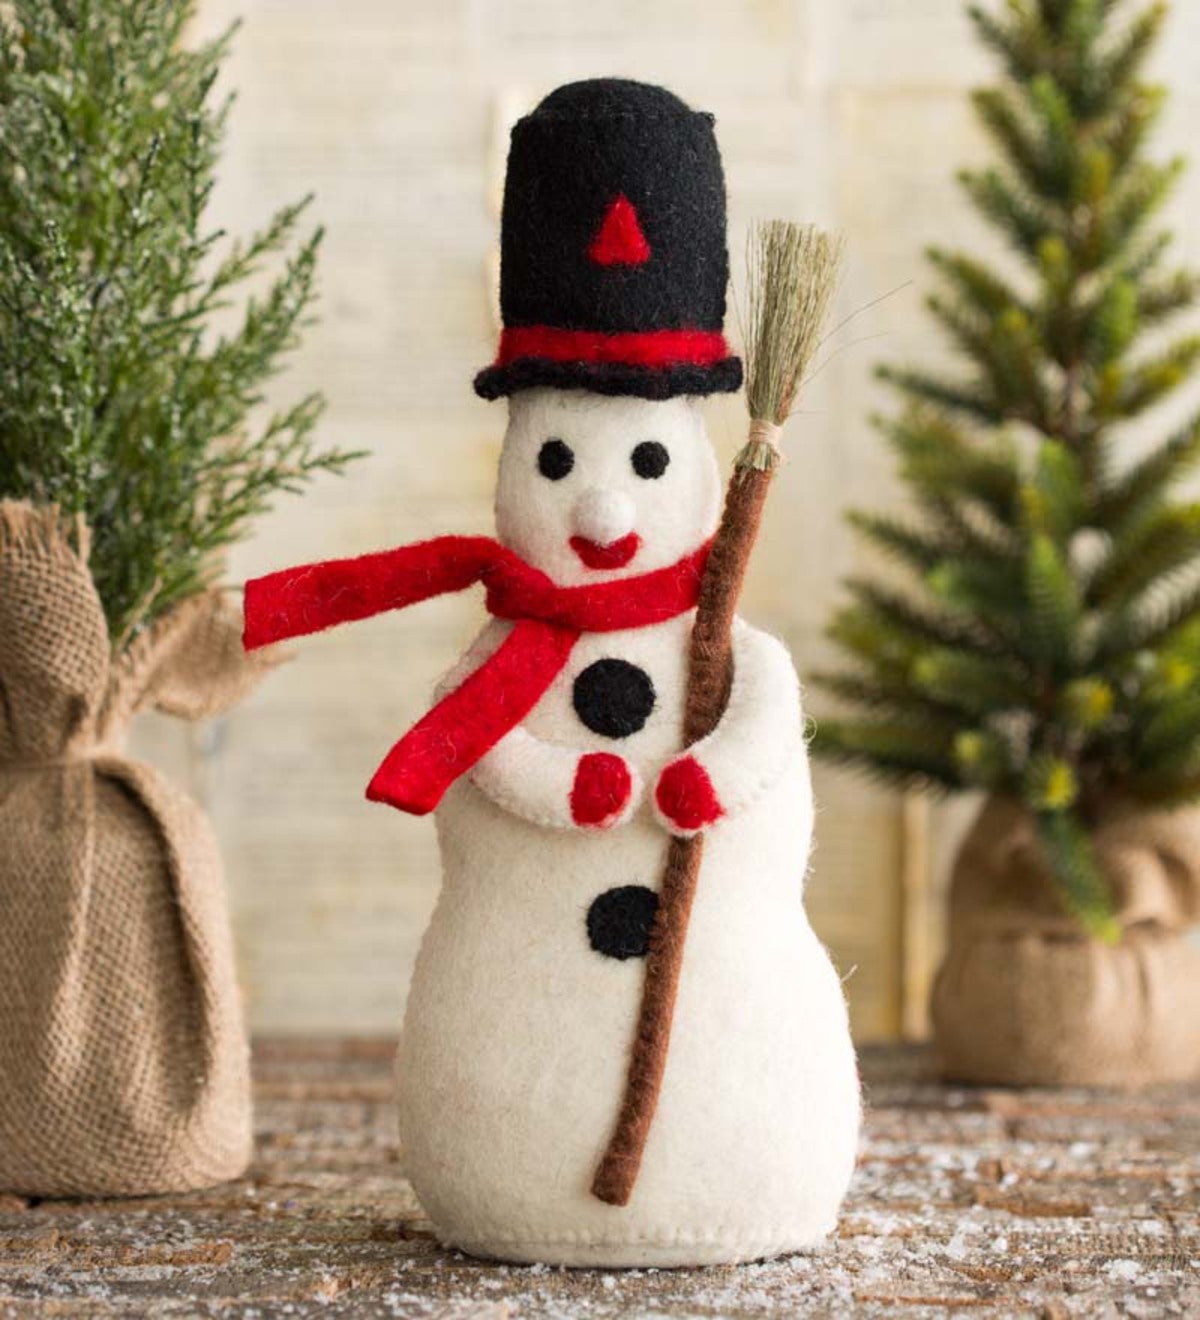 Handcrafted Snowman Holiday Figurine